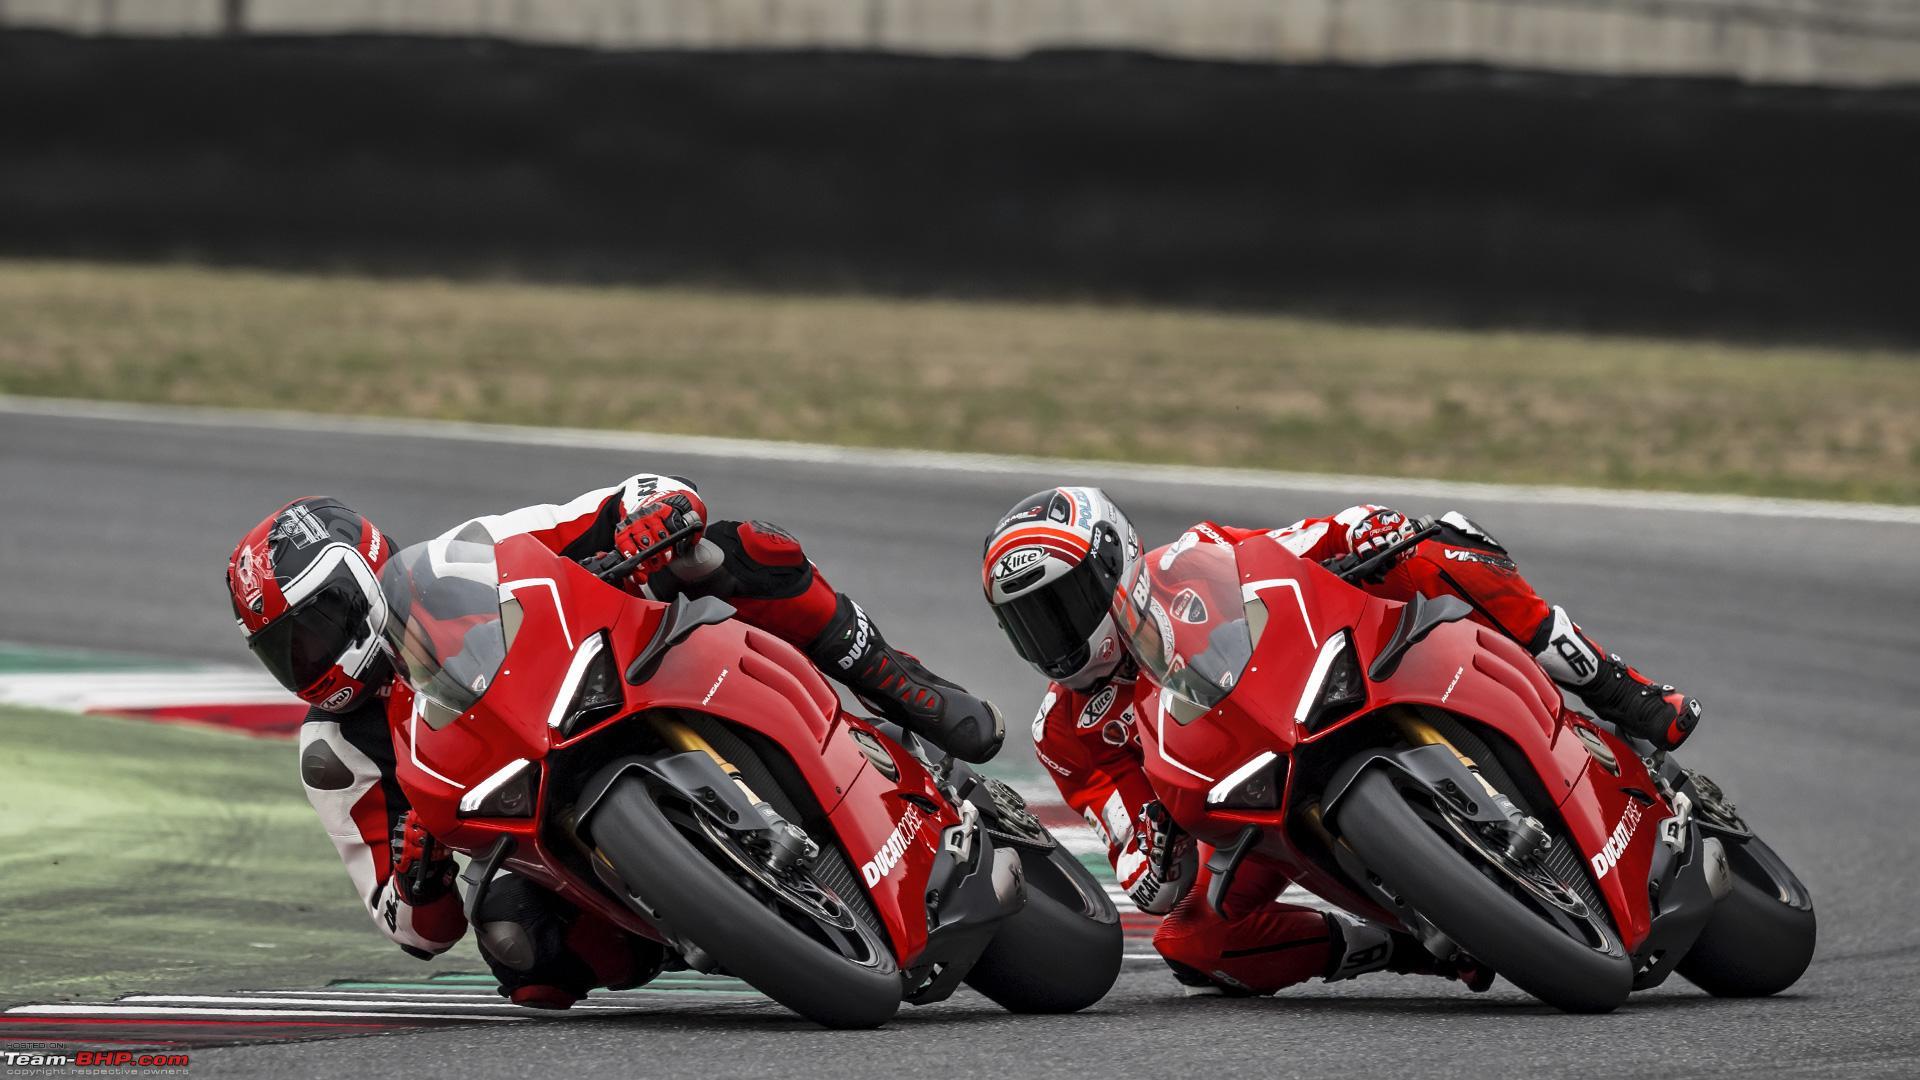 The Ducati Panigale V4 R, now launched at Rs 51.87 lakhs